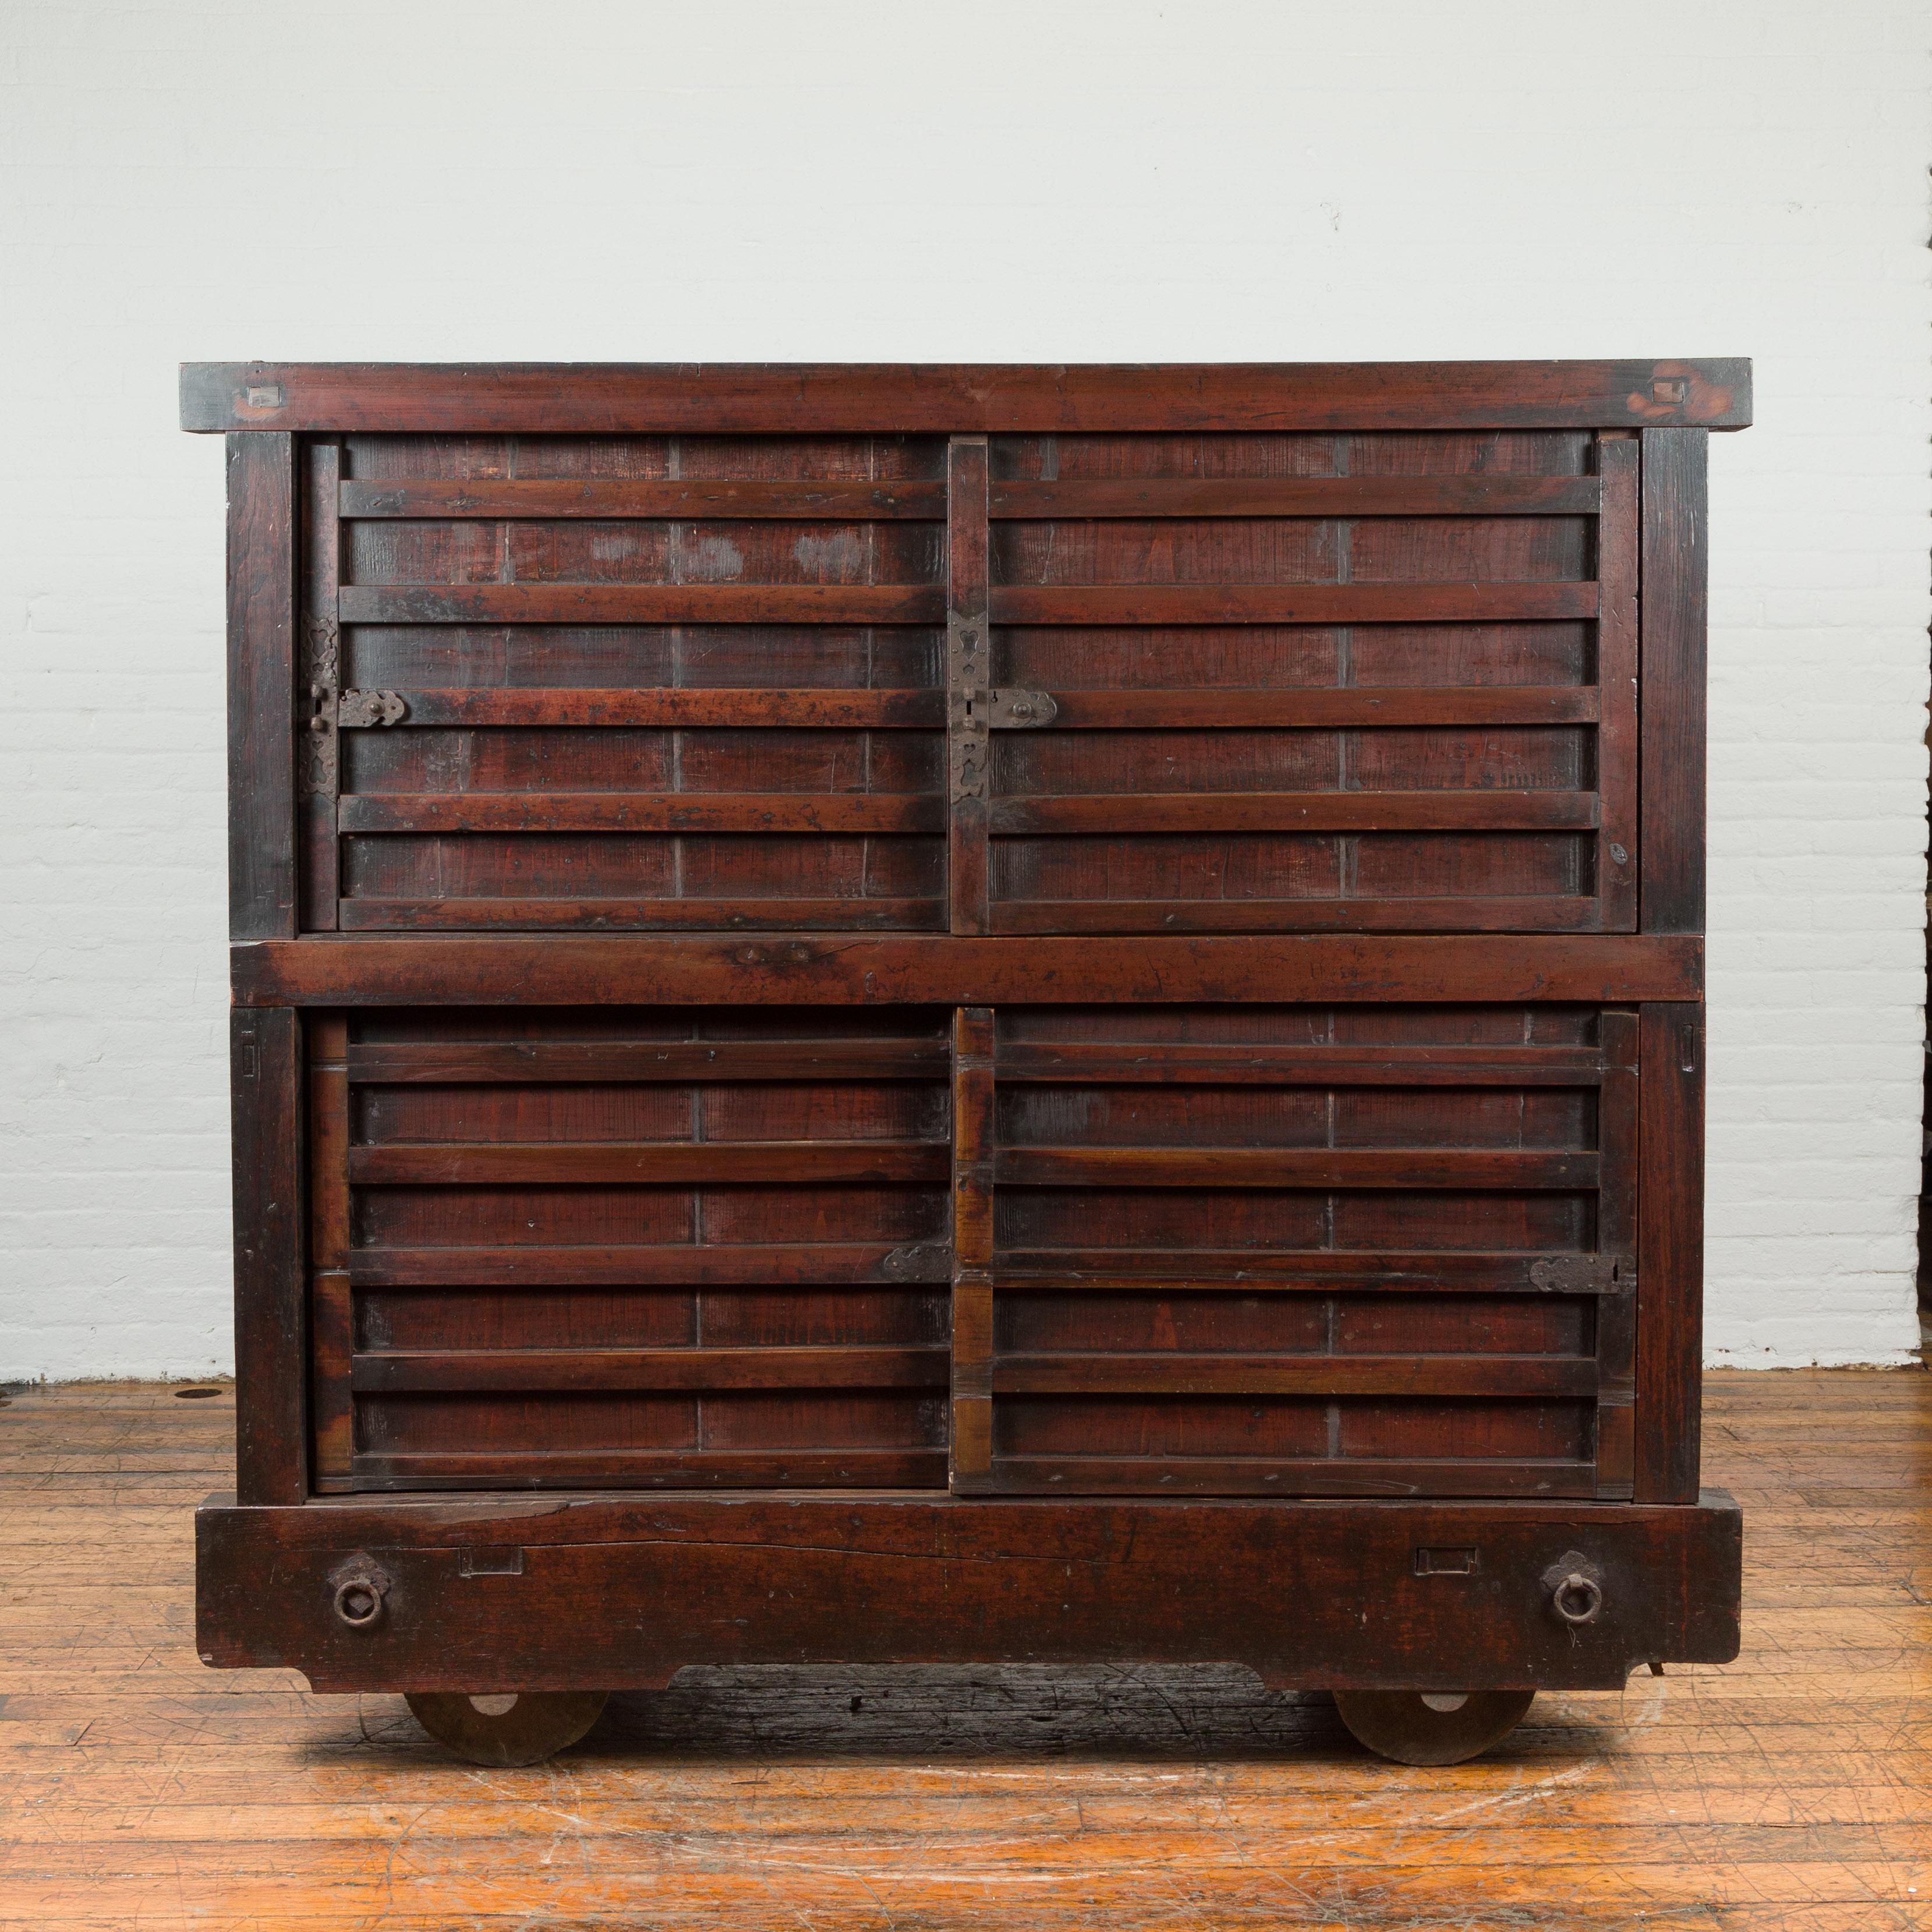 A Japanese Meiji period merchant's chest from the late 19th century, with wheels, sliding doors and dark patina. Created in Japan during the second half of the 19th century, this merchant's chest features a dark brown patina perfectly complimenting